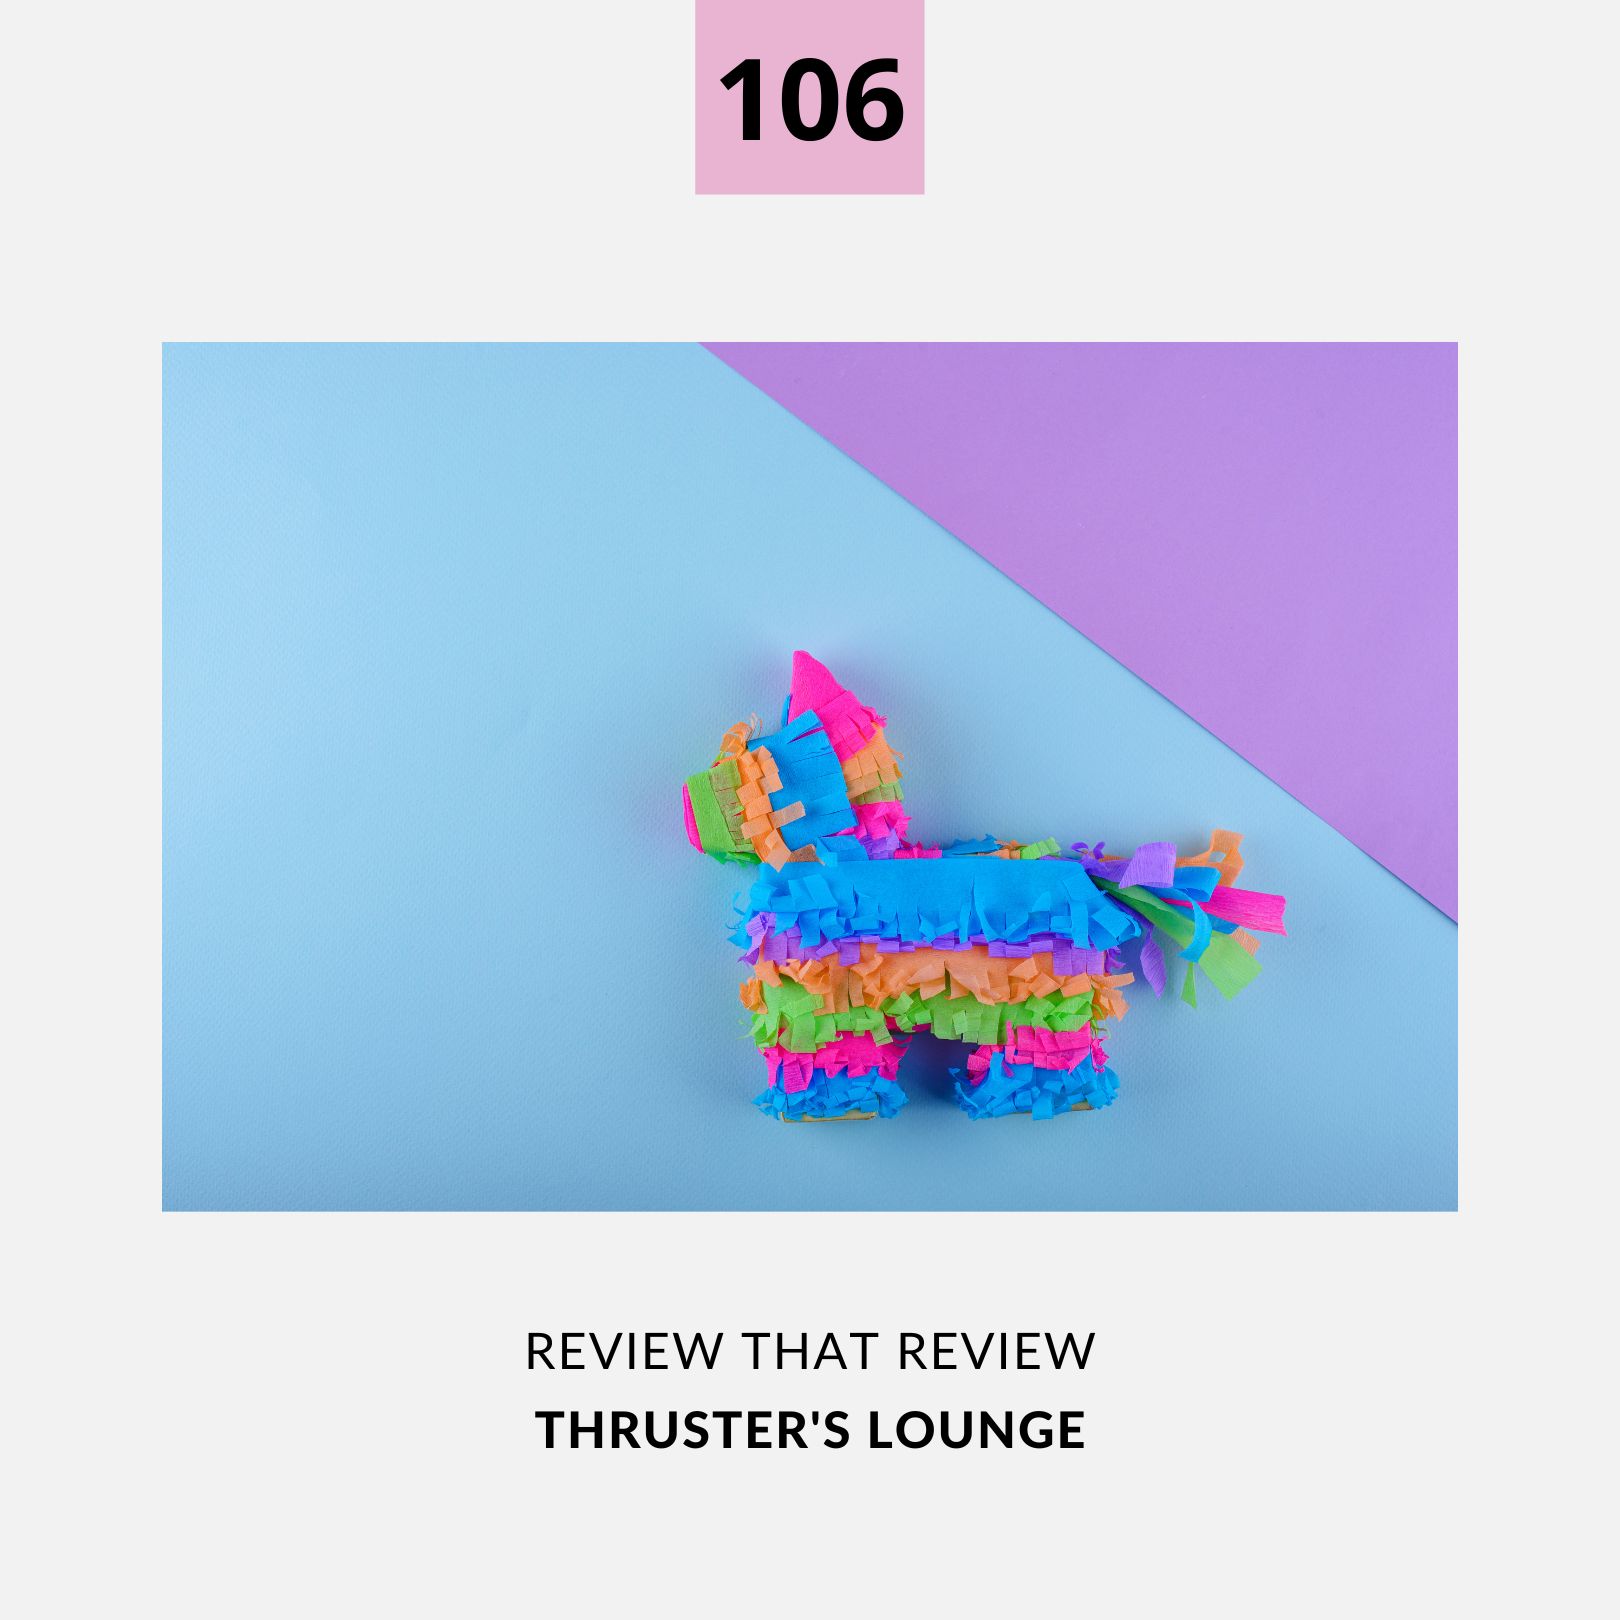 Episode 106: Thruster's Lounge - 1 Star Review